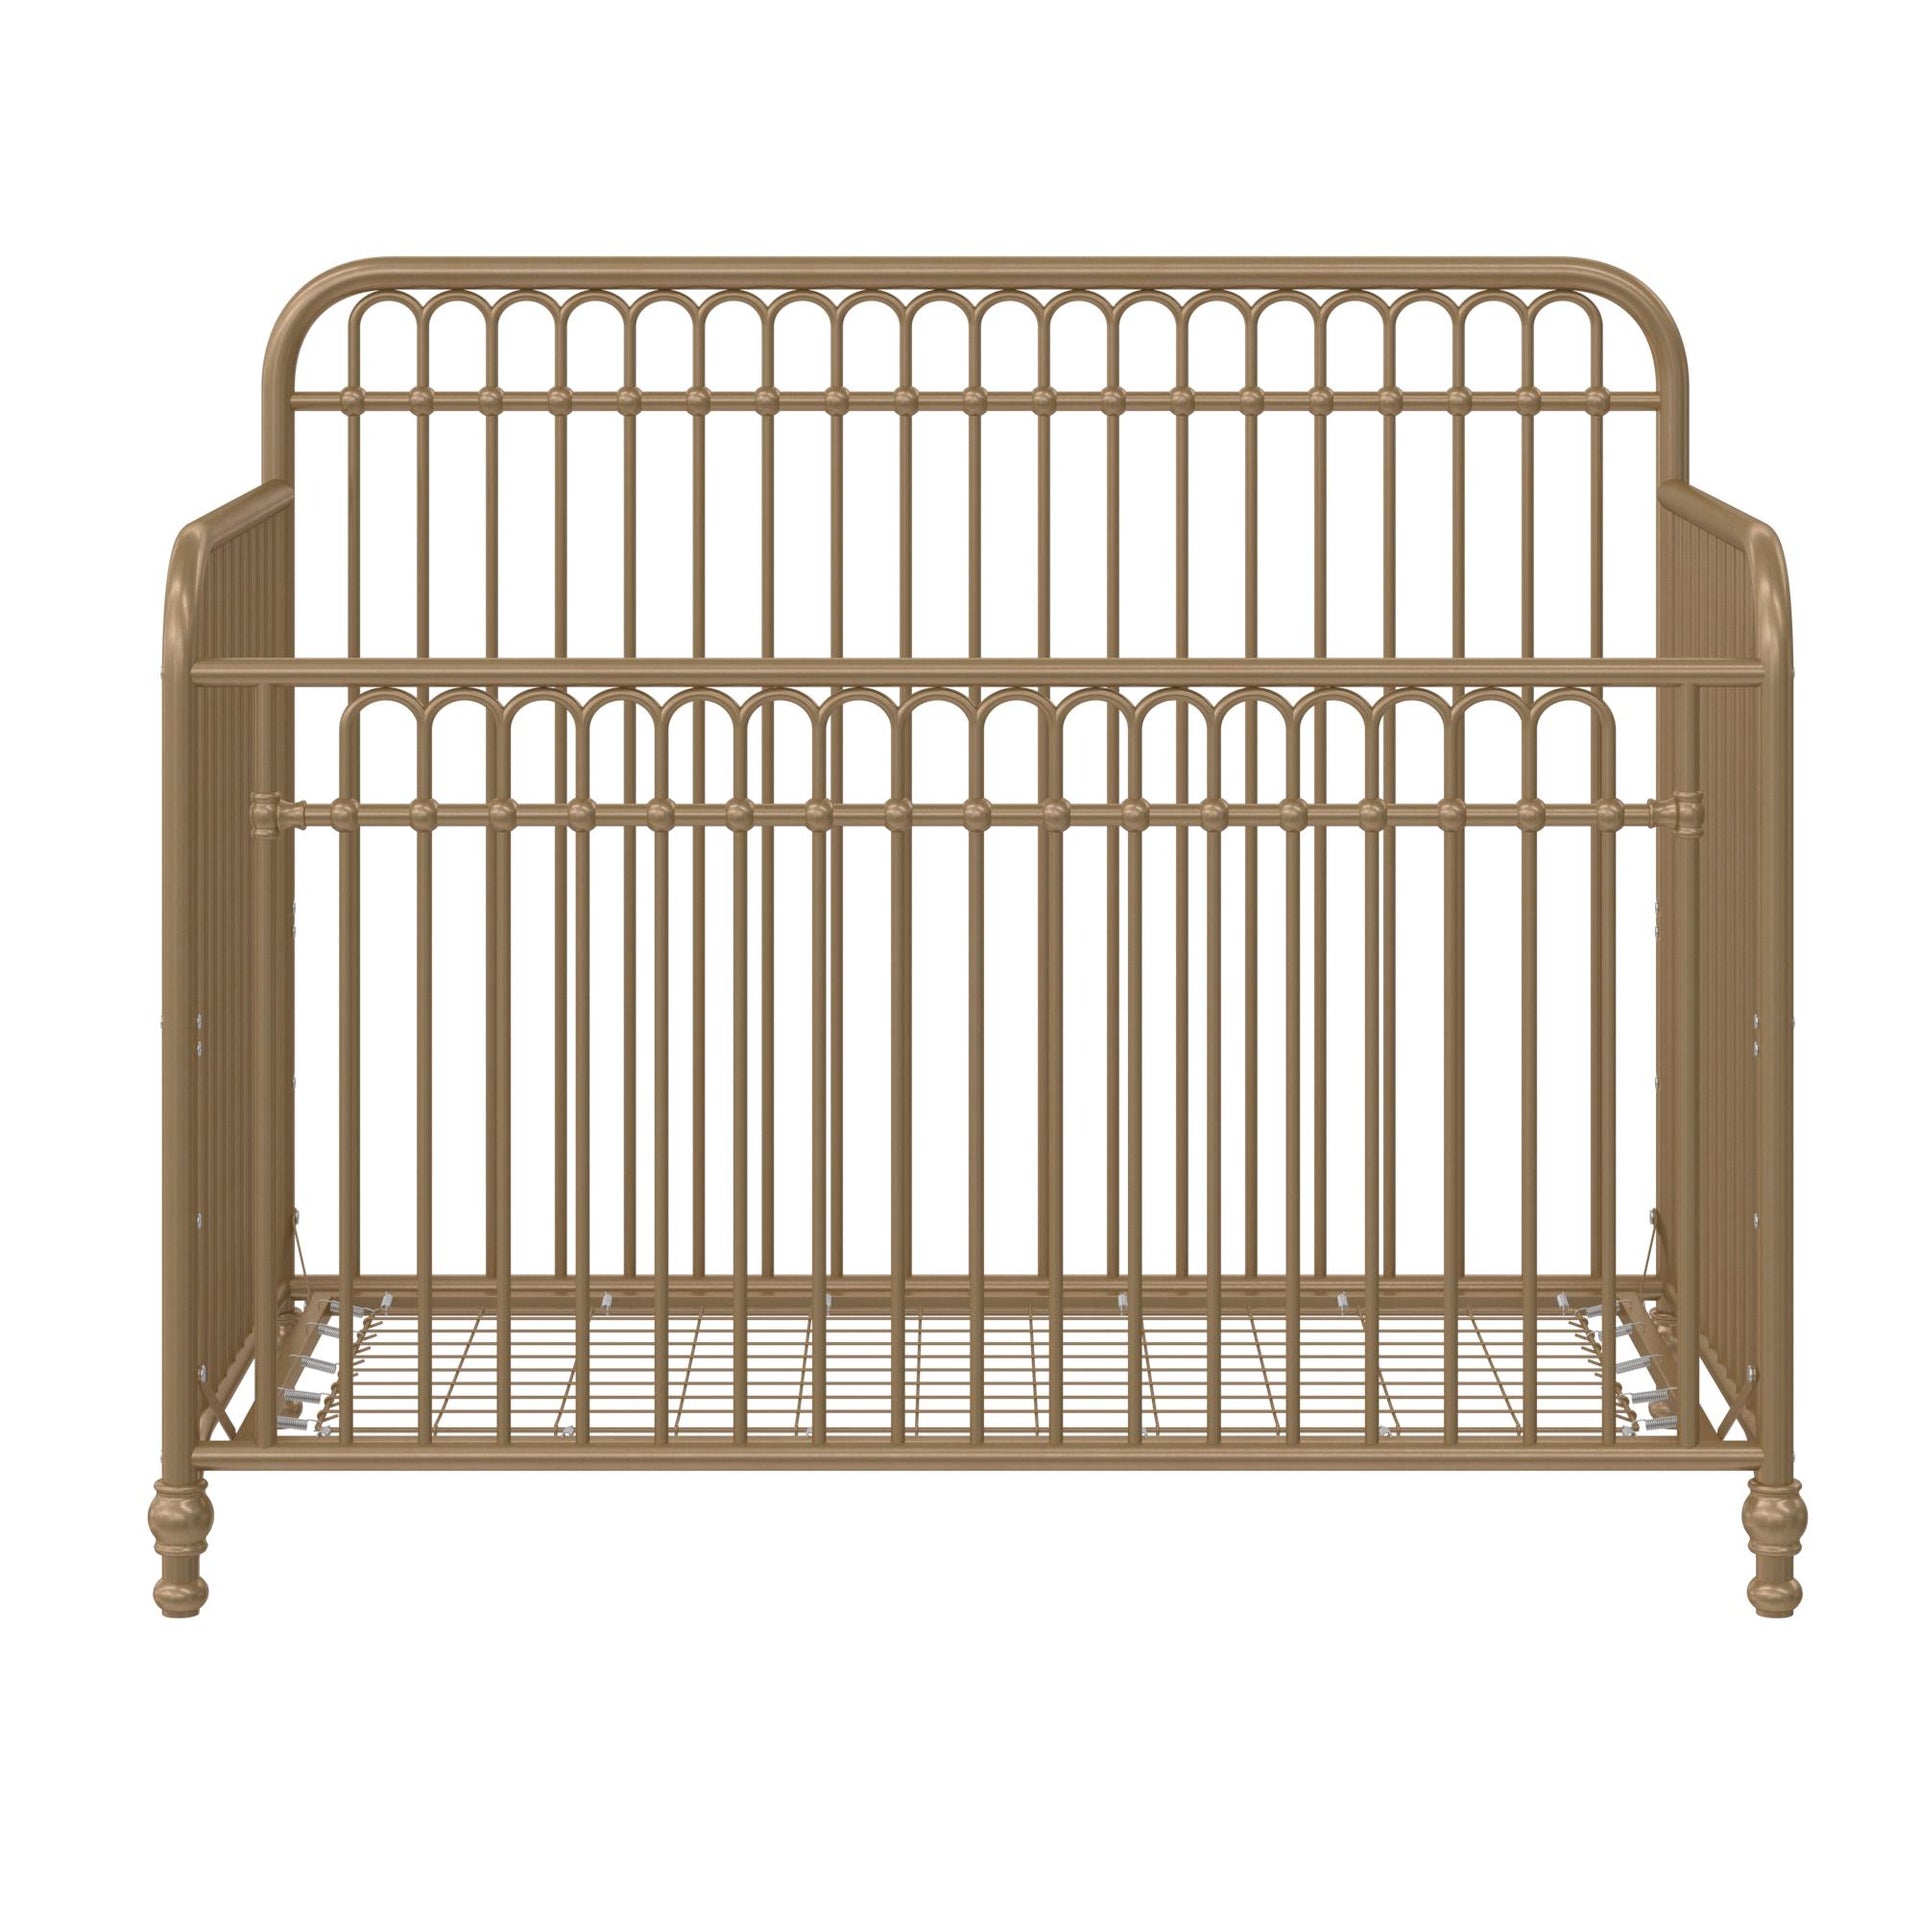 Little Seeds Ivy 3-in-1 Convertible Metal Crib - Gold